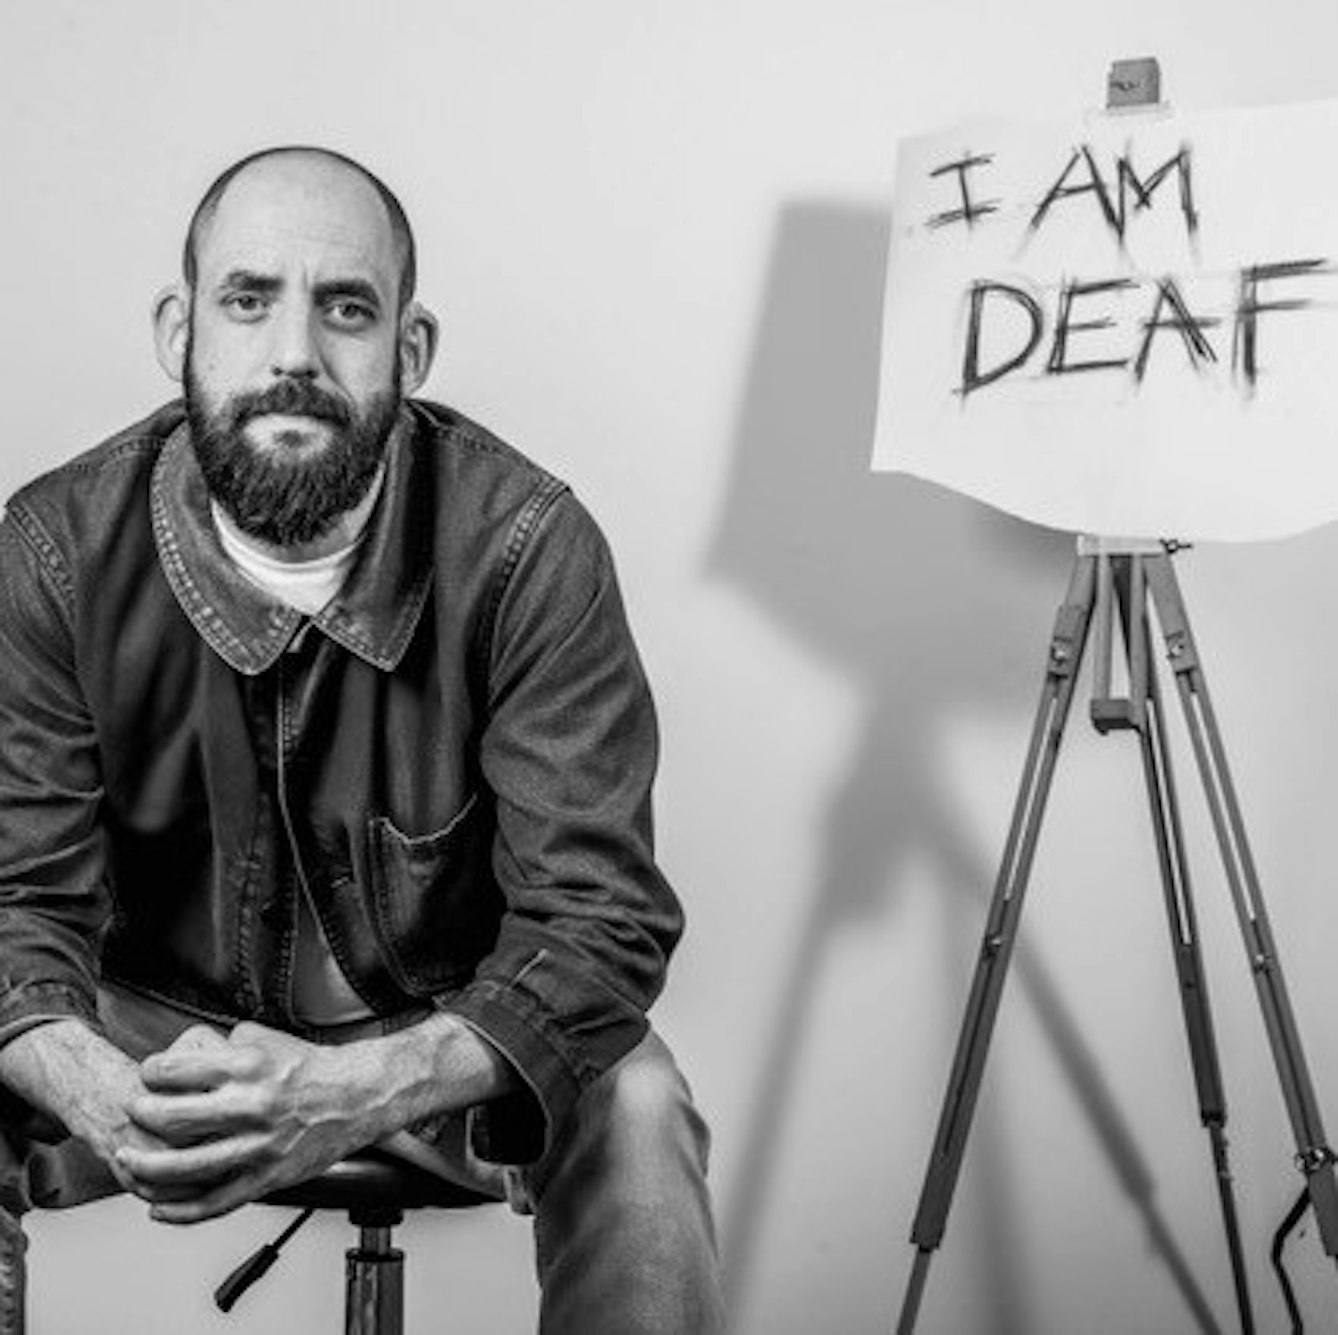 Black and white photograph of artist Jonny Cotsen. Sign in background reads "I am deaf"